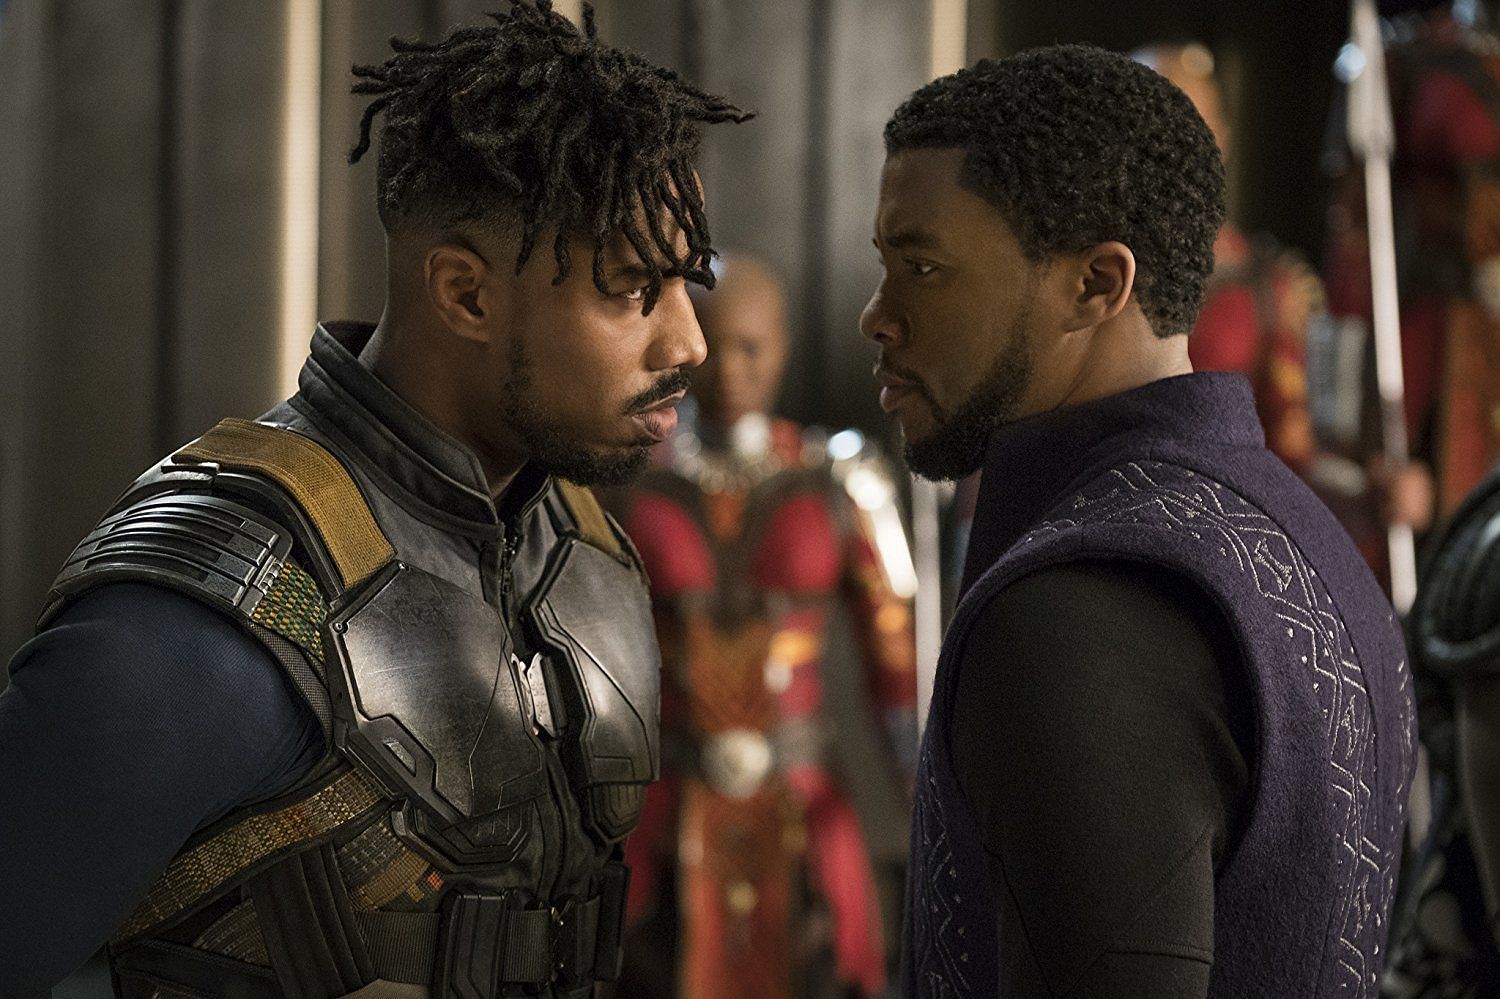 Killmonger&#039;s tragic past and burning desire for justice drive his actions as a villain in Black Panther (Image via Marvel Studios)